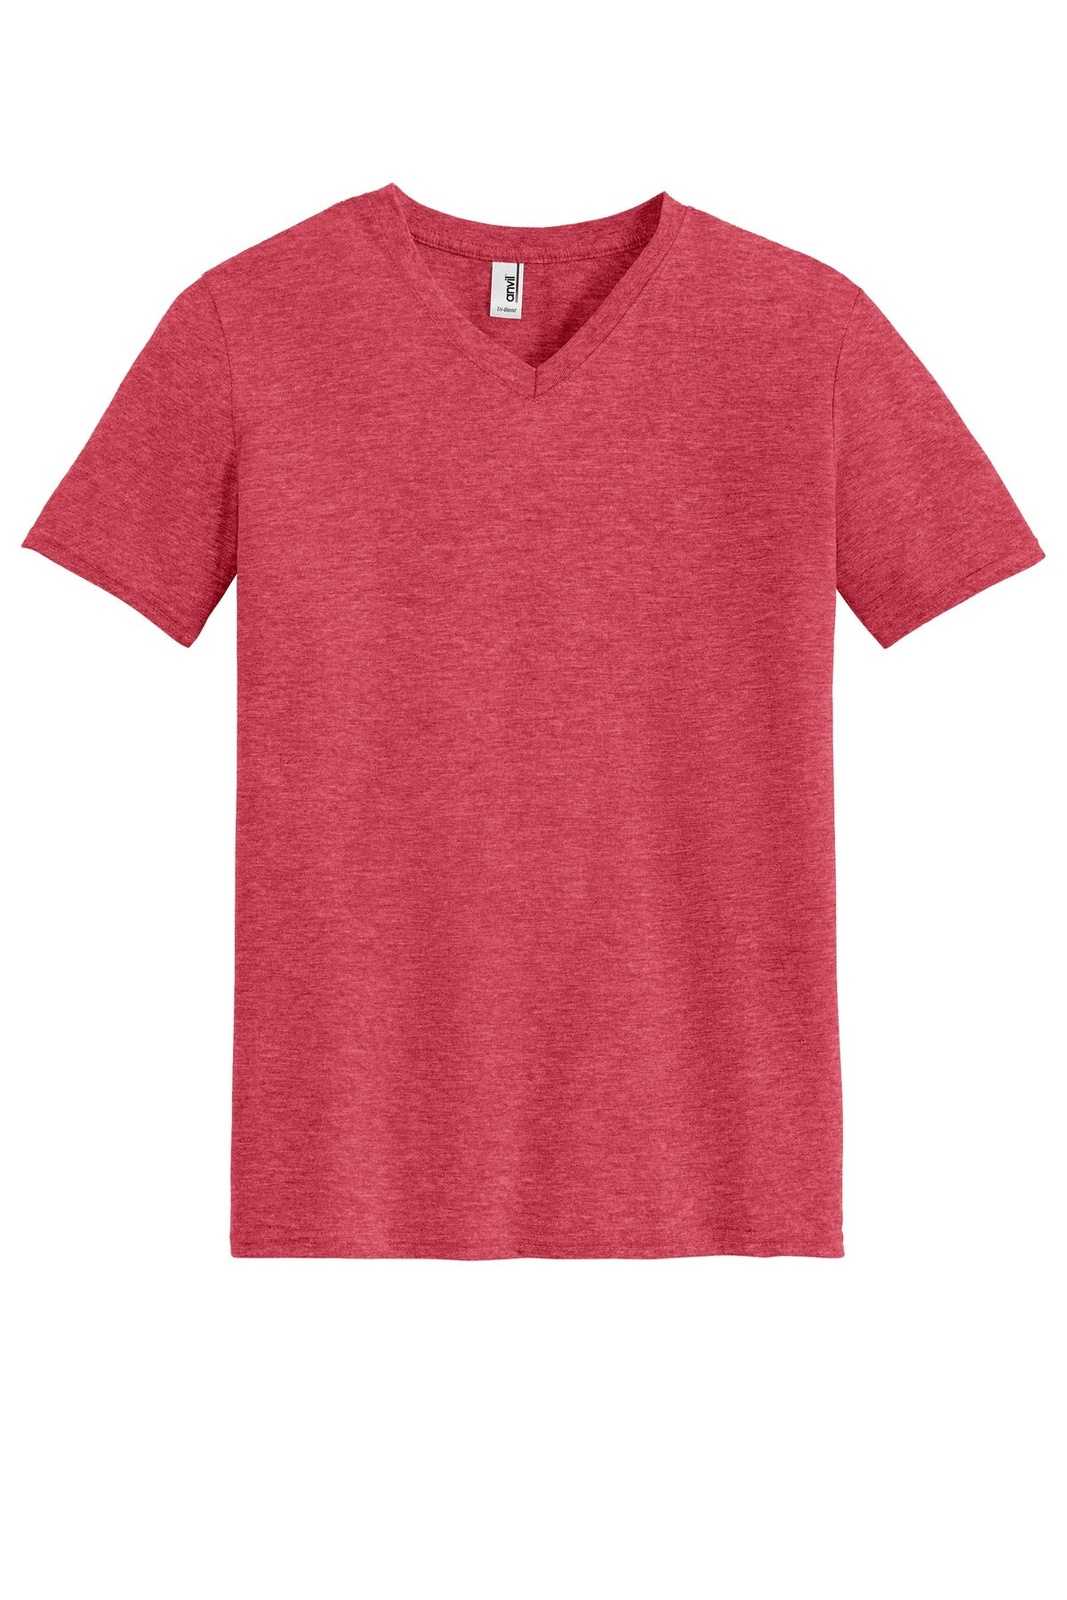 Anvil A6752 Tri-Blend V-Neck Tee - Heather Red - HIT a Double